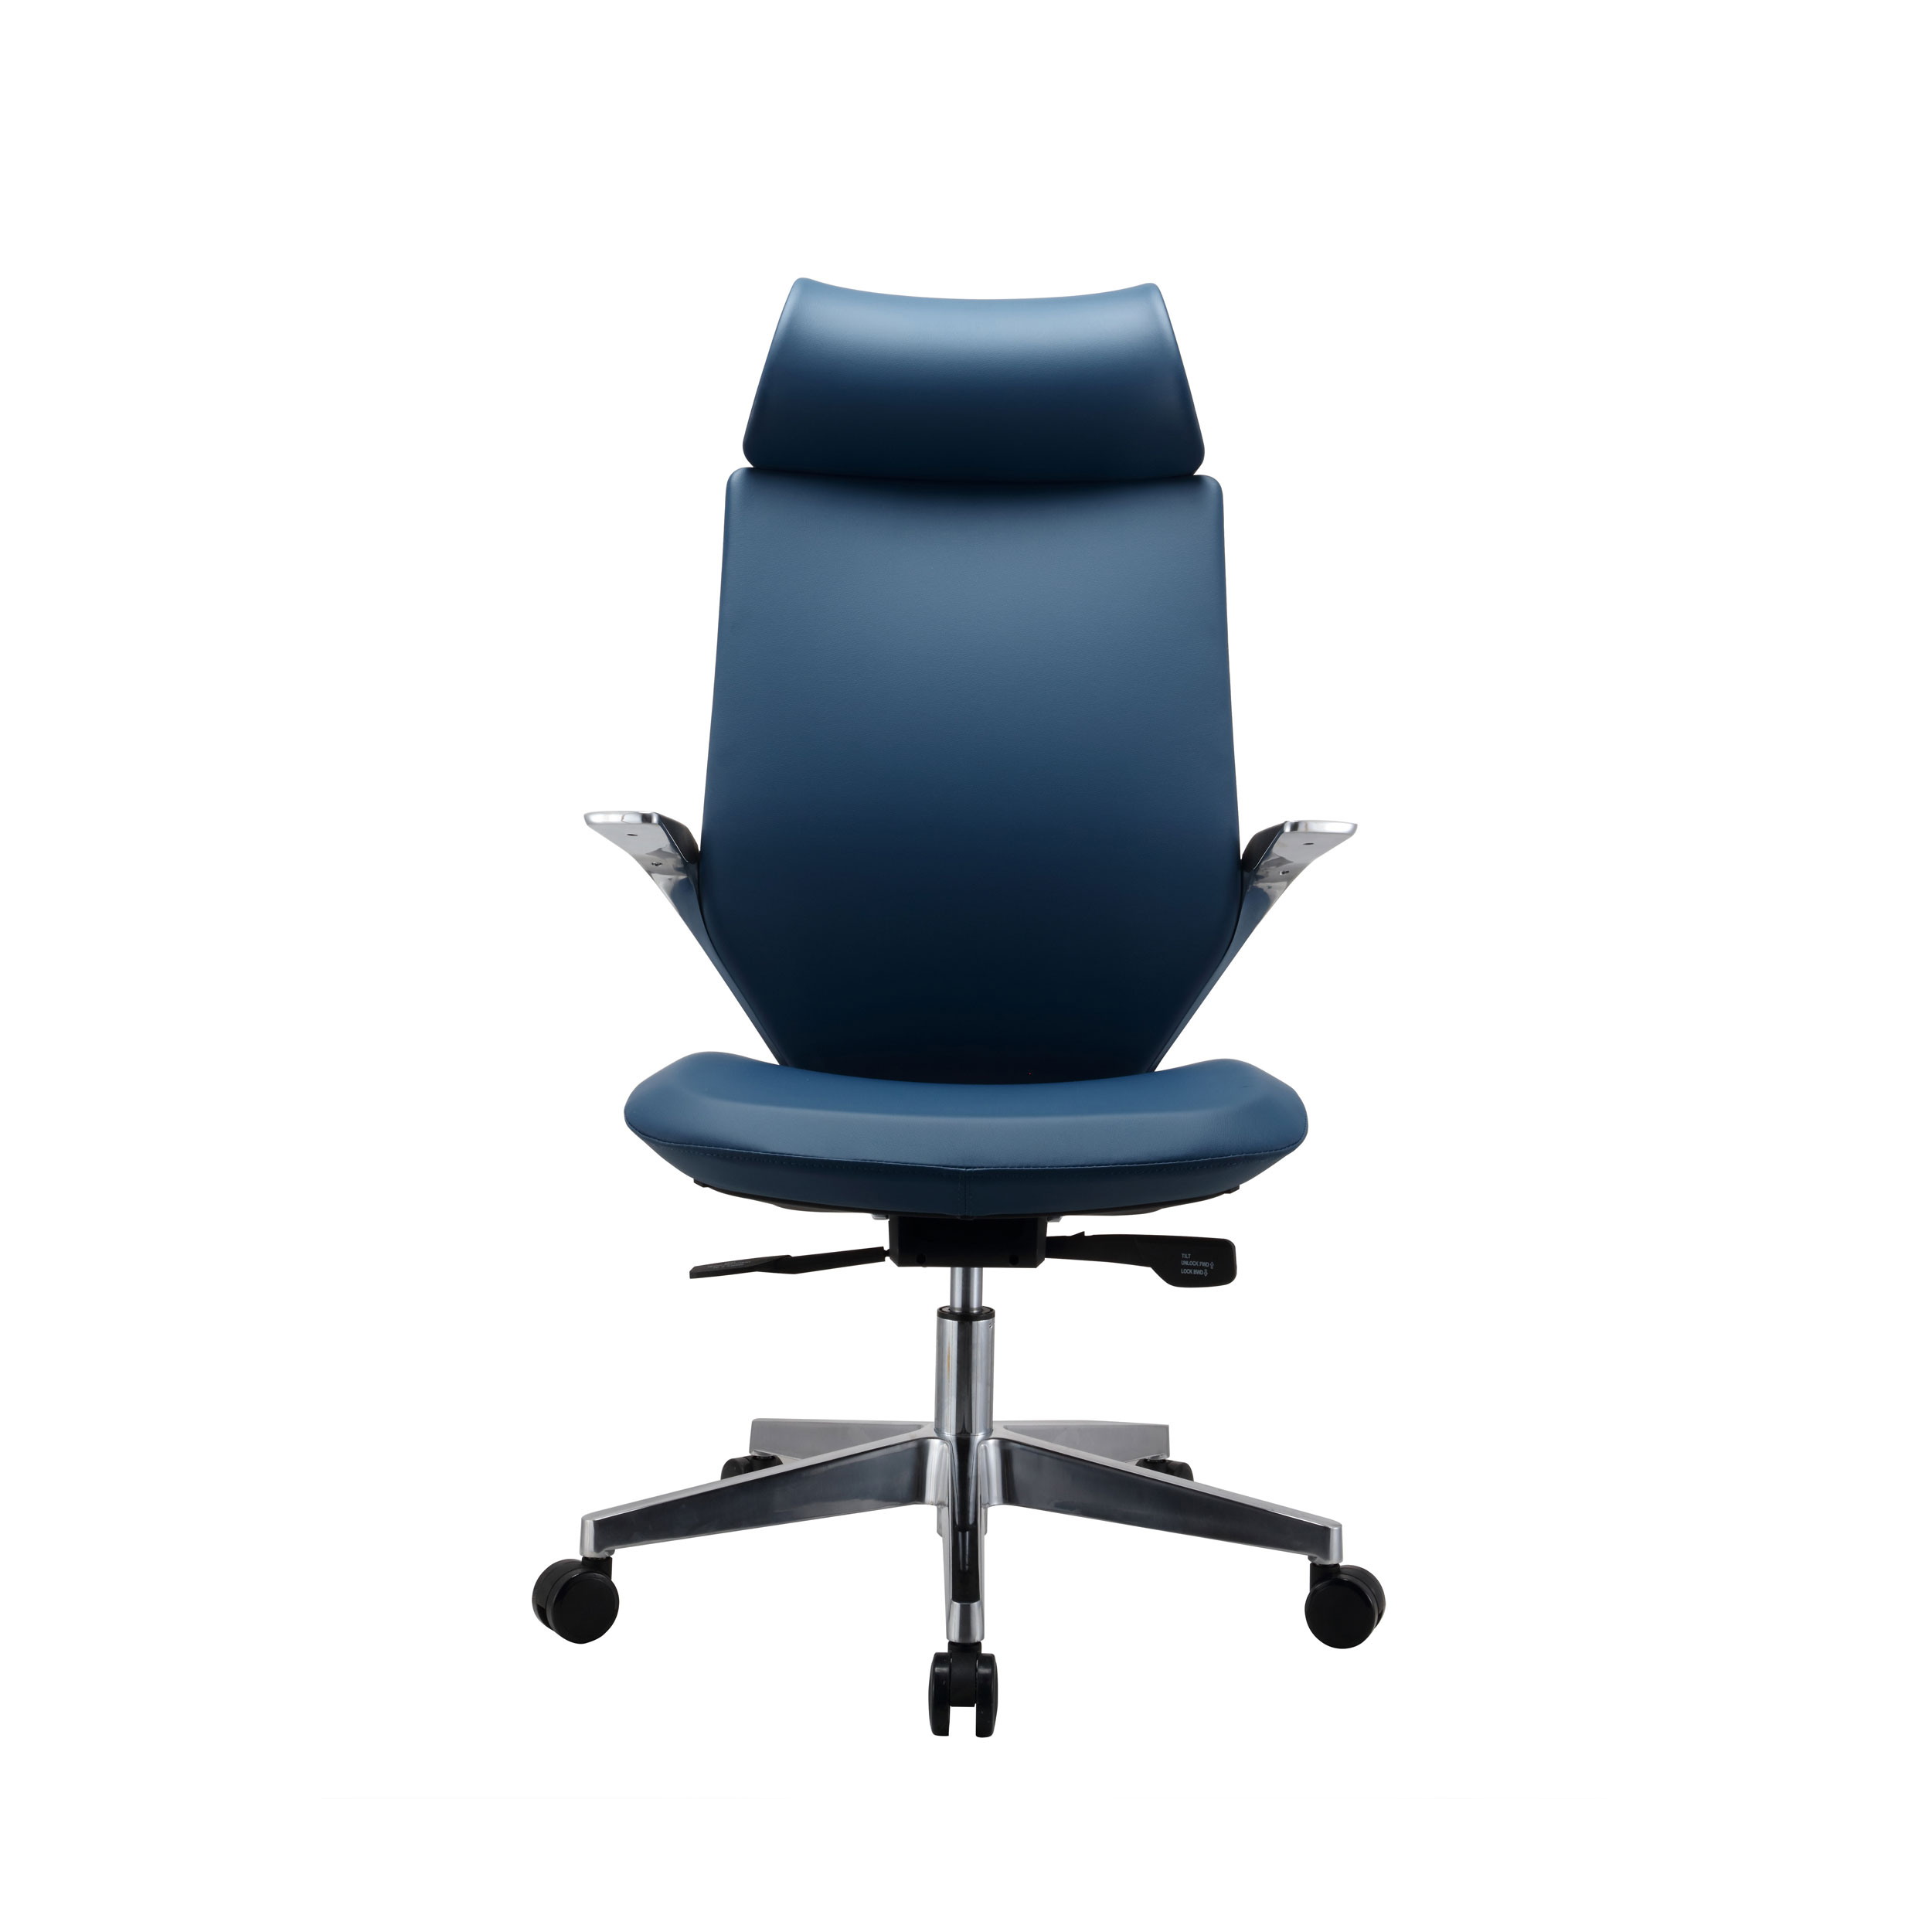 Front Profile of Flow Desk Chair